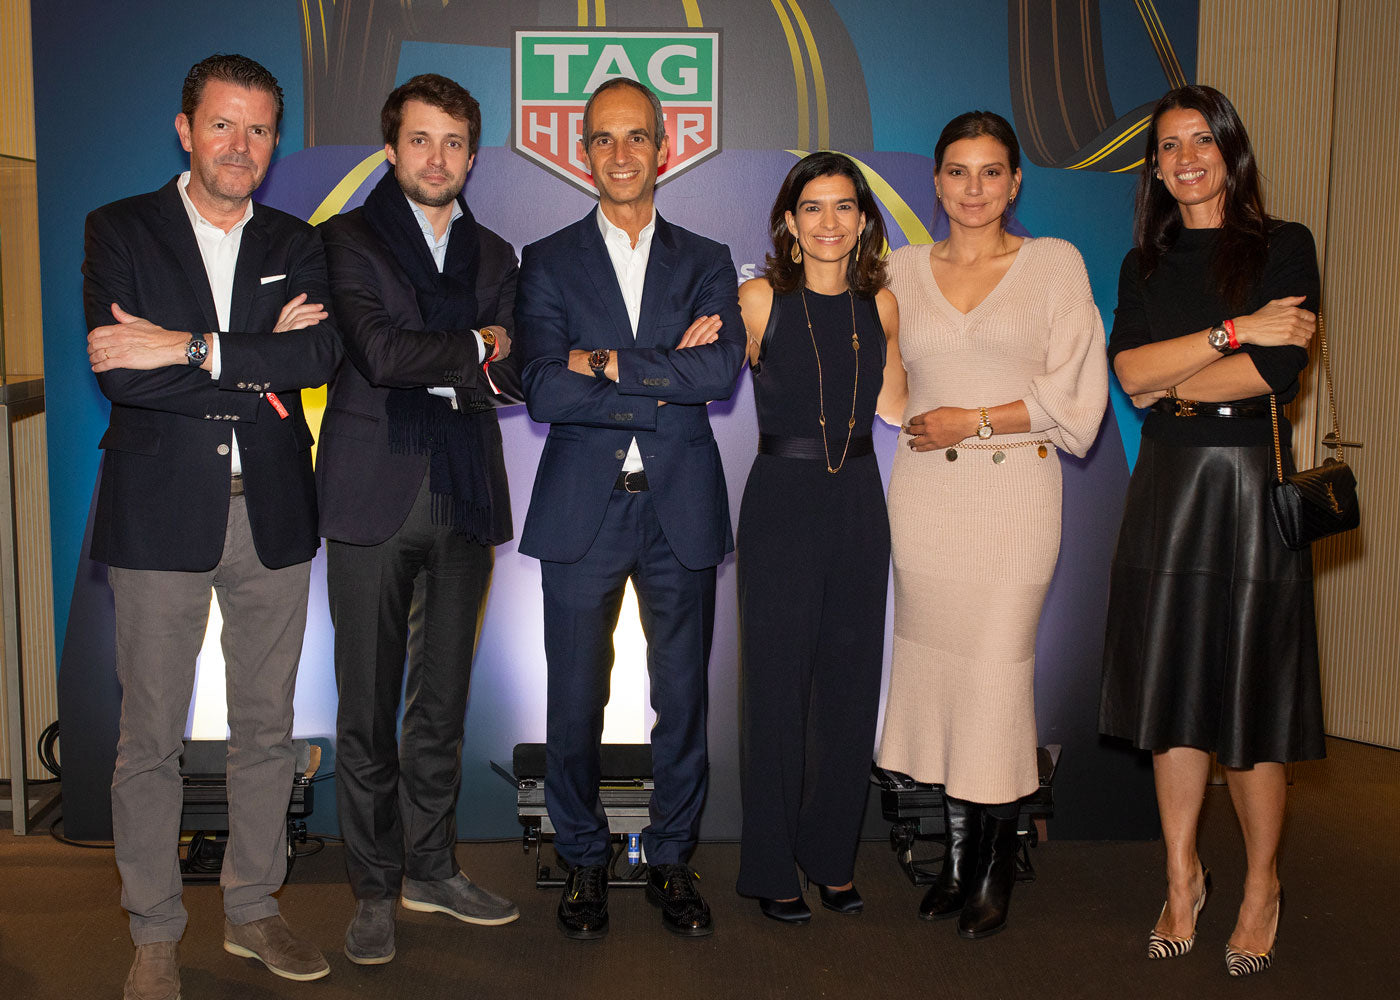 TAG Heuer celebrates the opening of its first boutique in Portugal